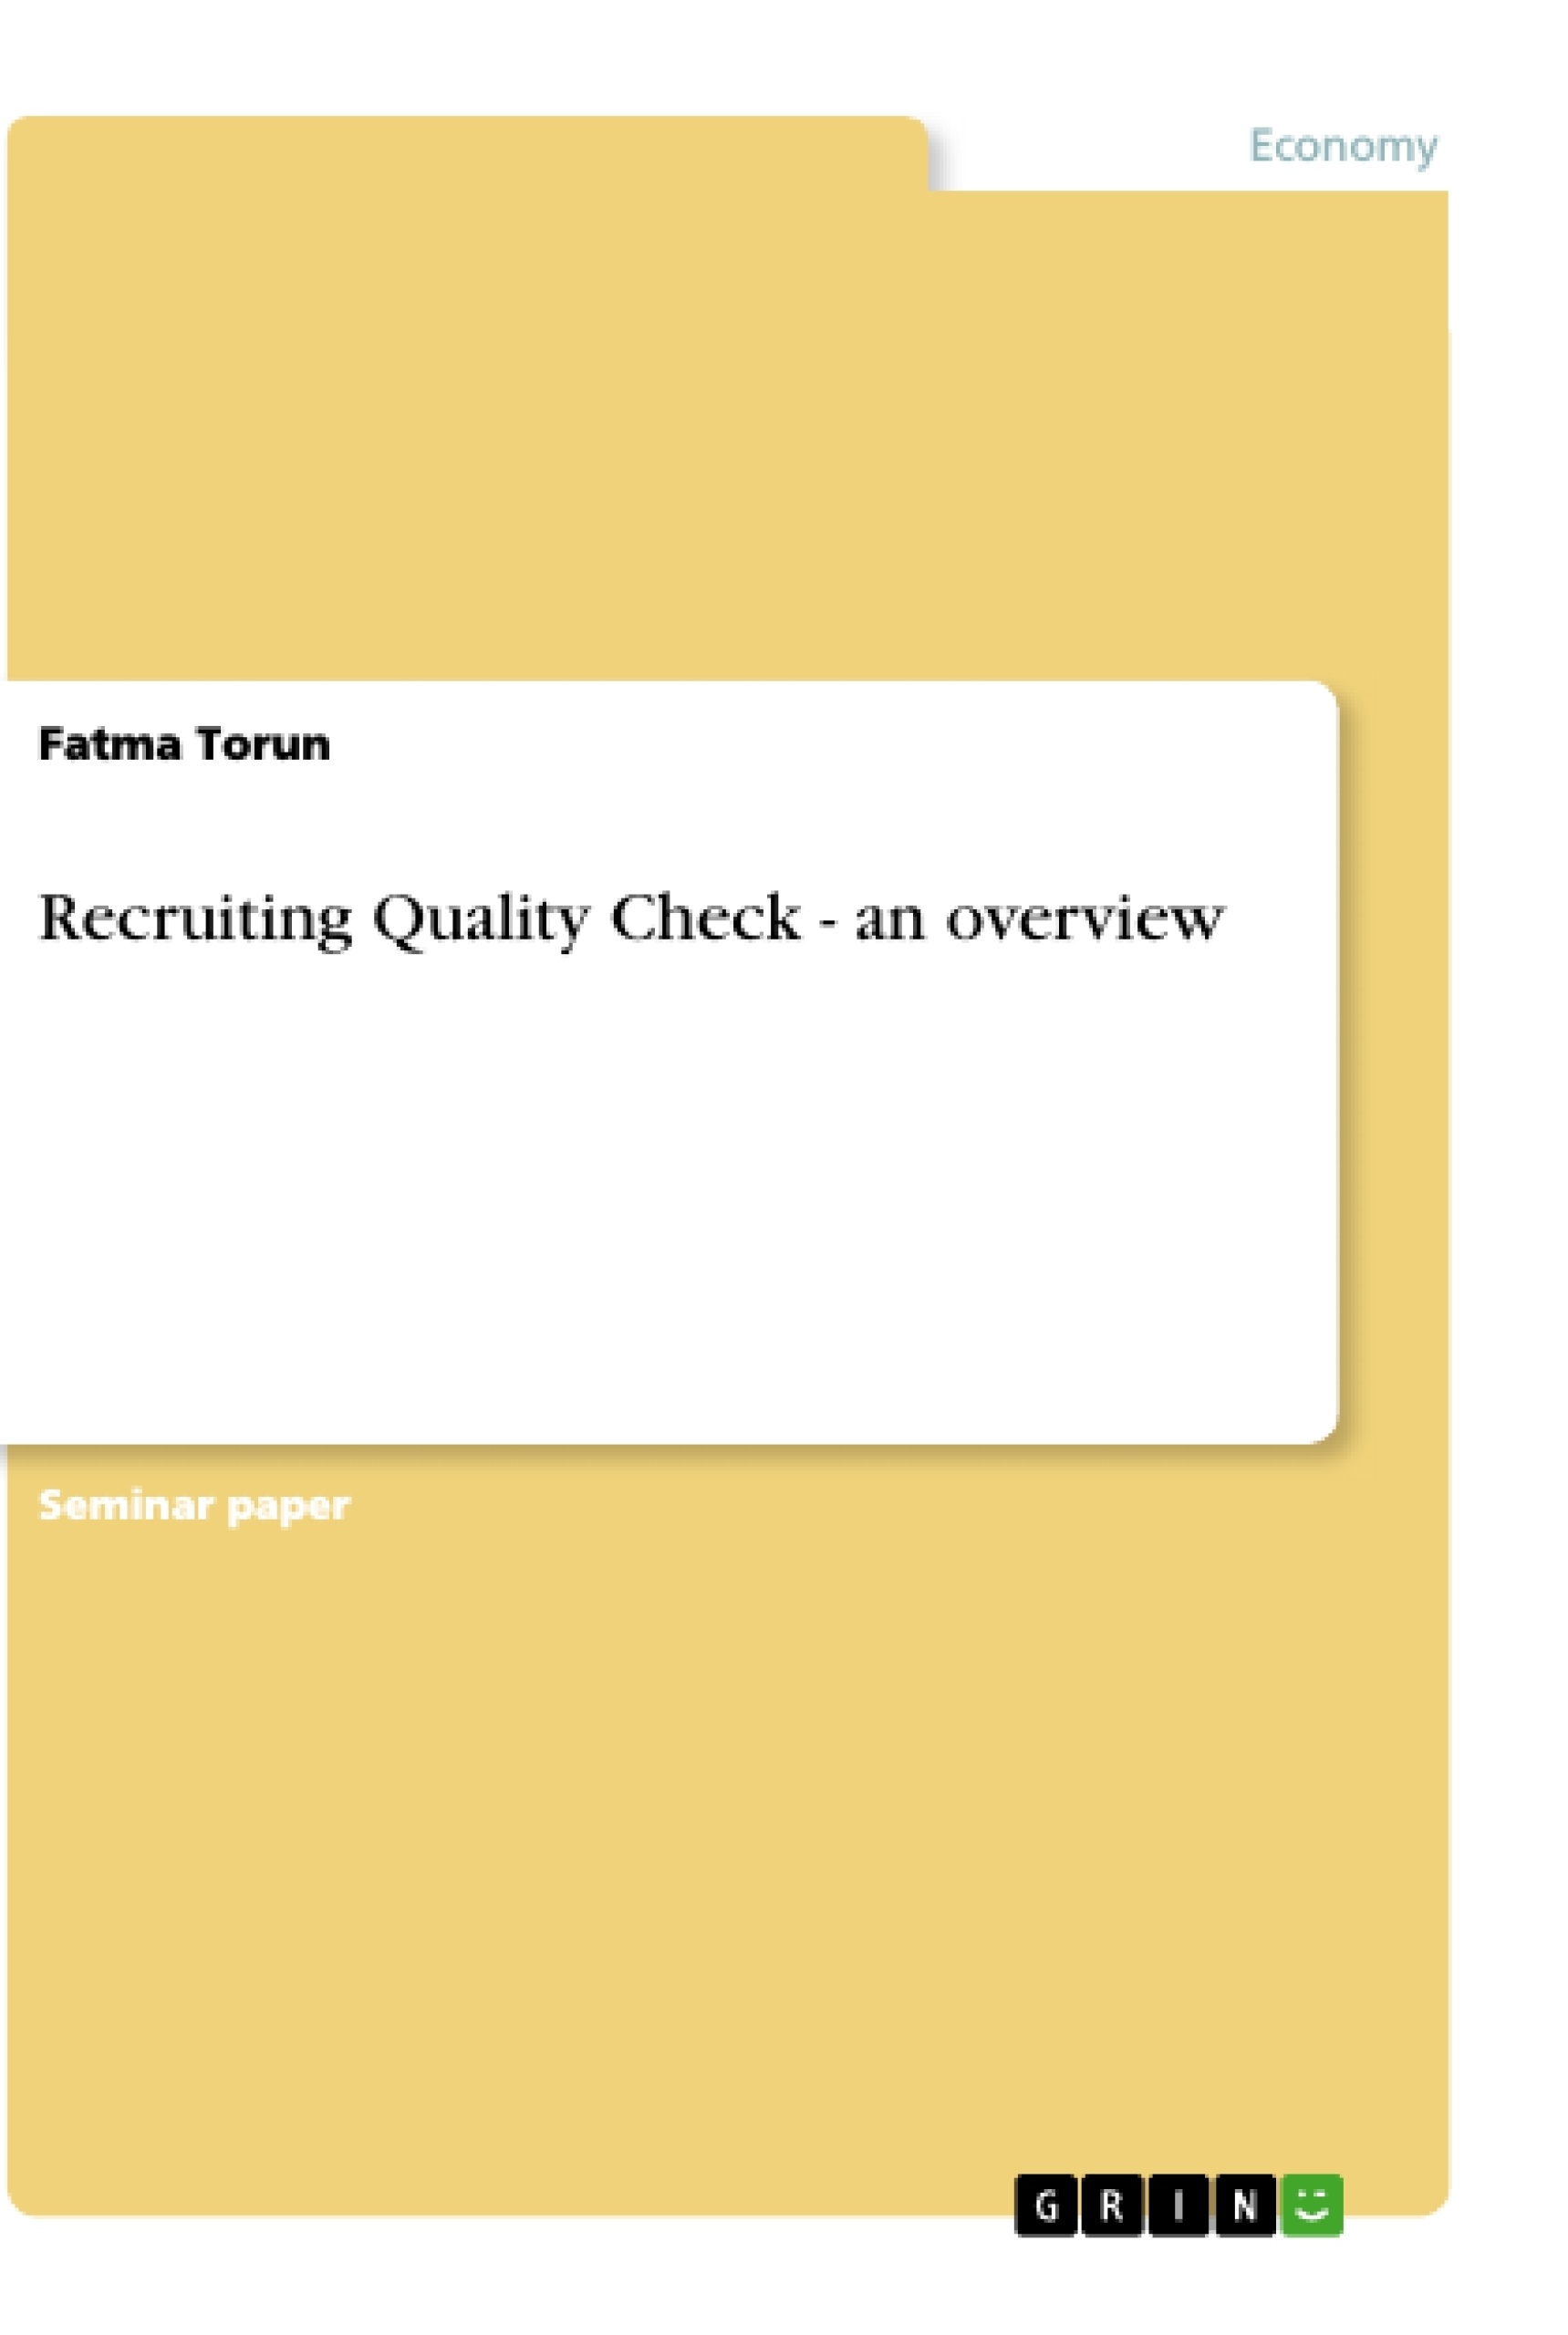 Title: Recruiting Quality Check - an overview